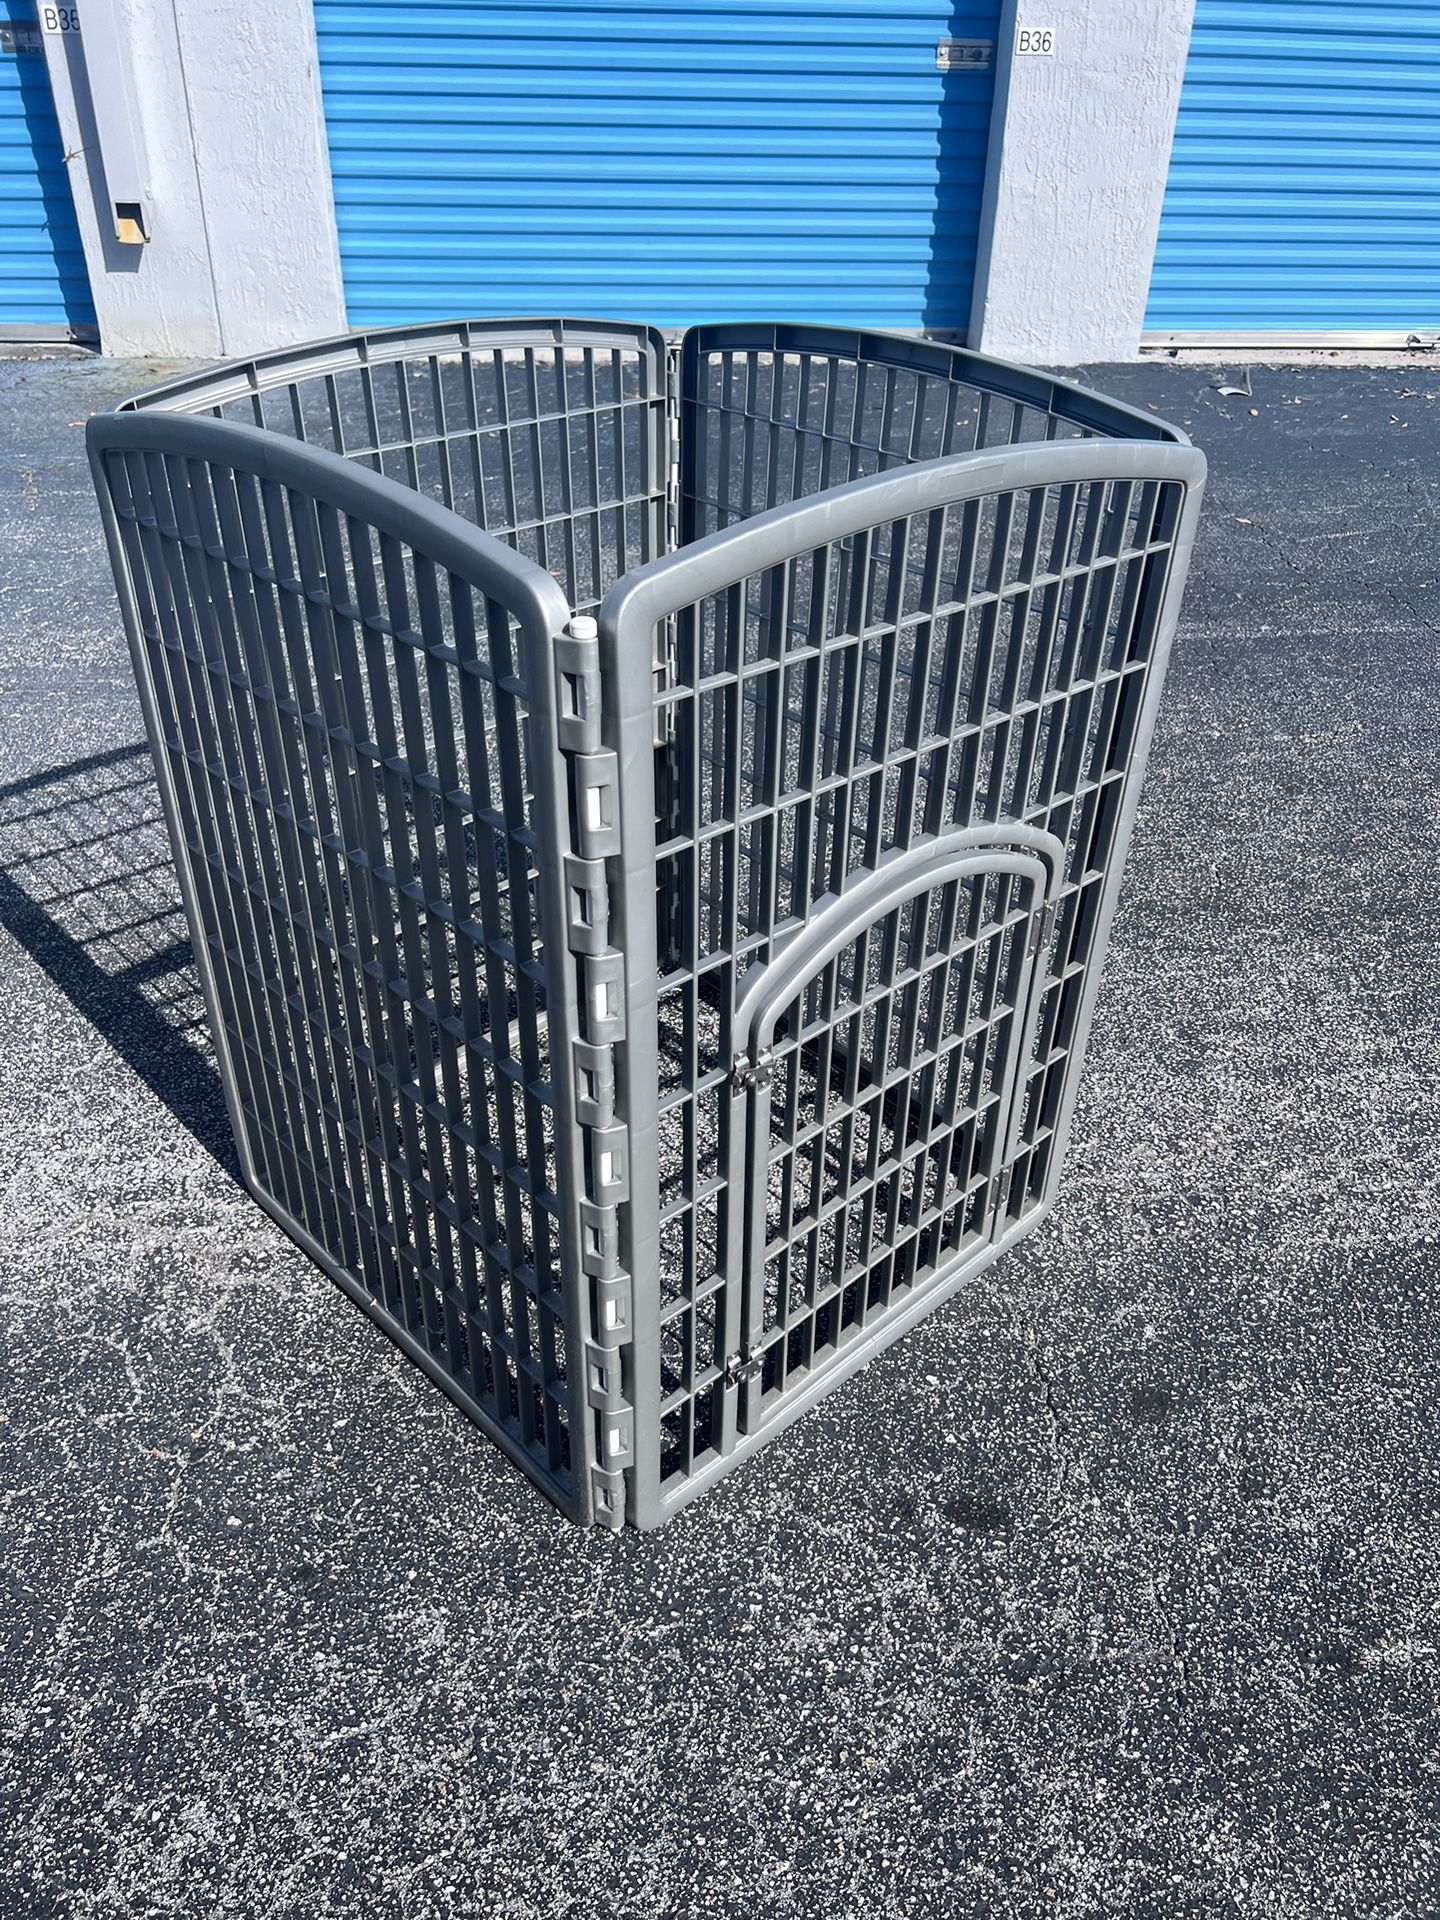 Foldable Plastic Square Tall Dog Pet Containment Fence Enclosure Playpen Kennel with Locking Gate! Each Panel 24.5x33in  One of the rods hold it toget